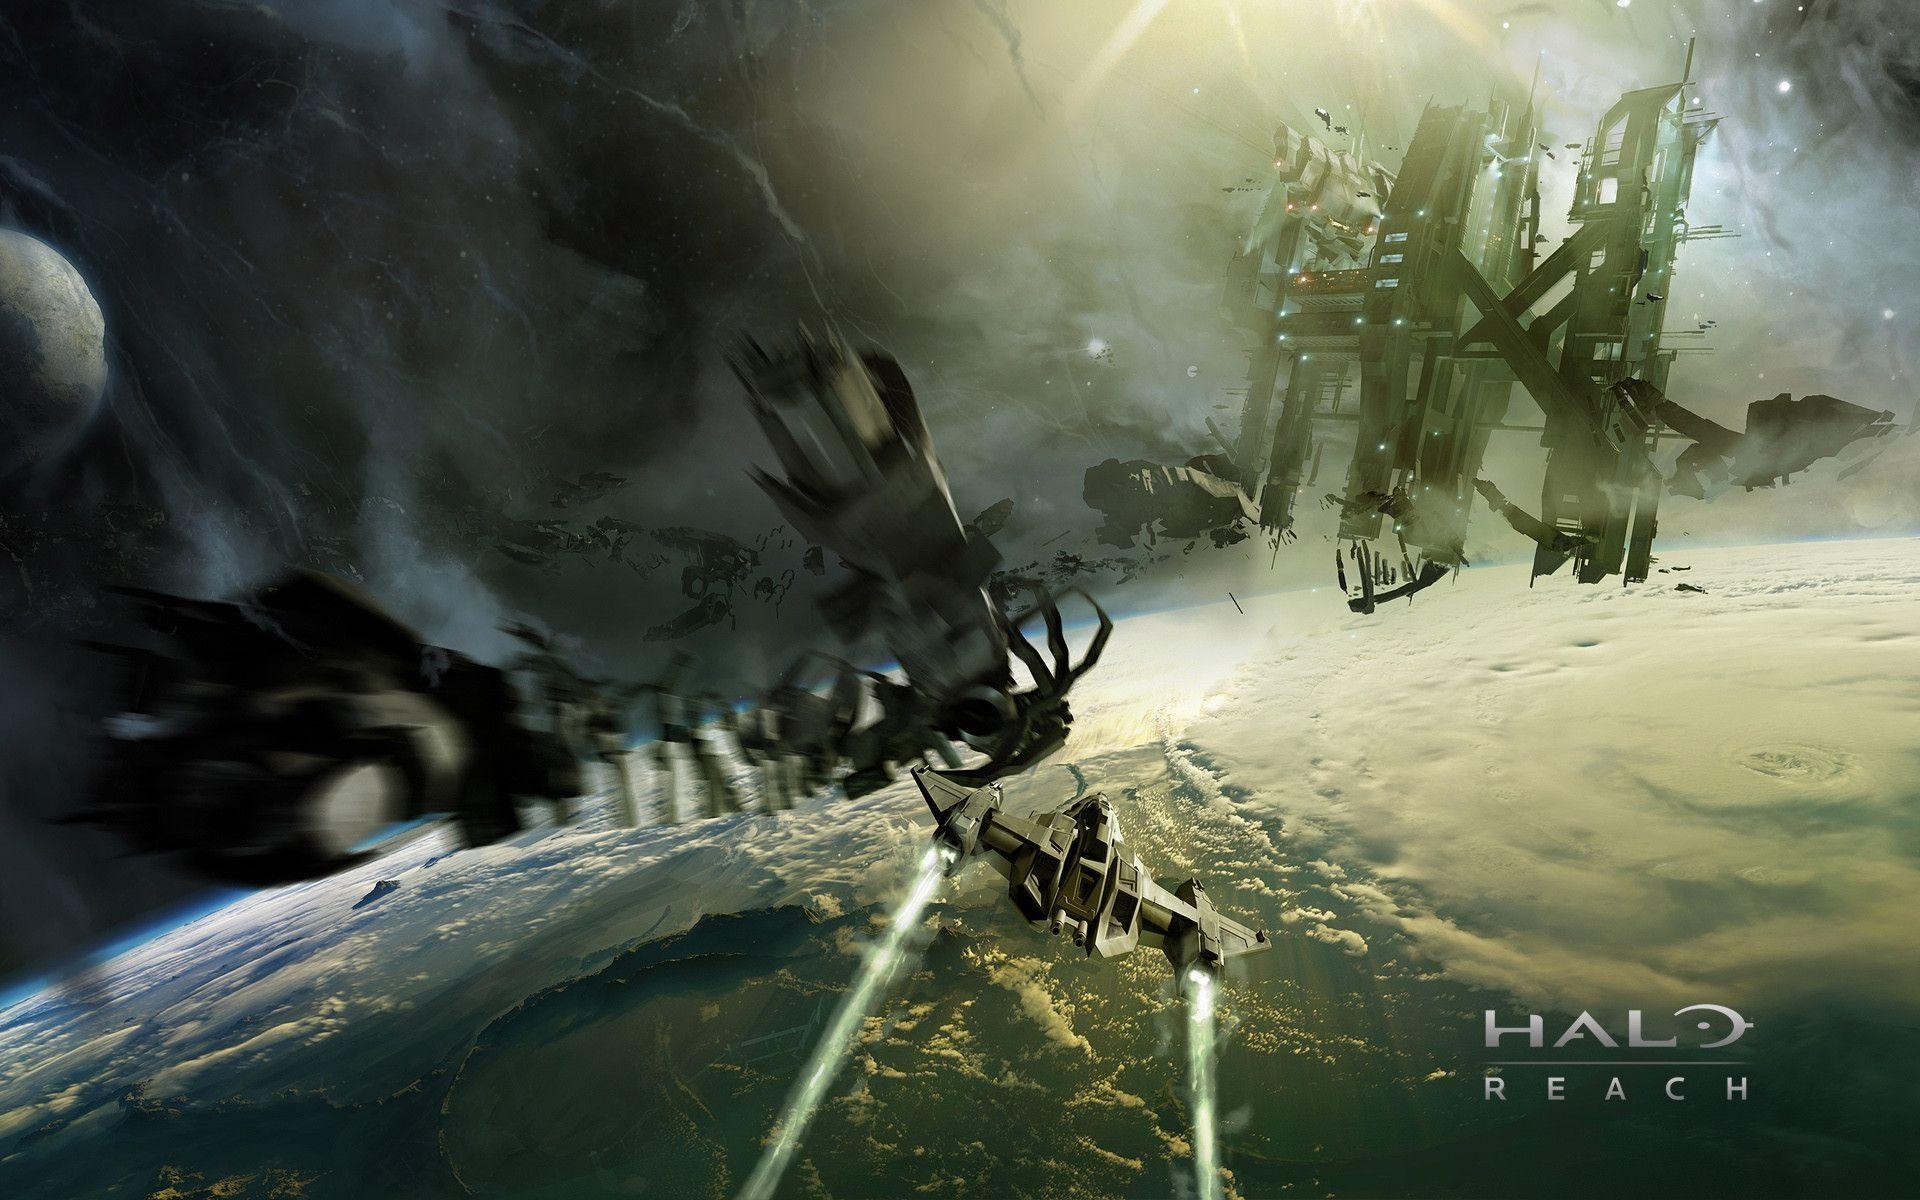 Halo: Reach gaming, Iconic wallpaper choice, Request for higher resolution, Obsession with perfection, 1920x1200 HD Desktop